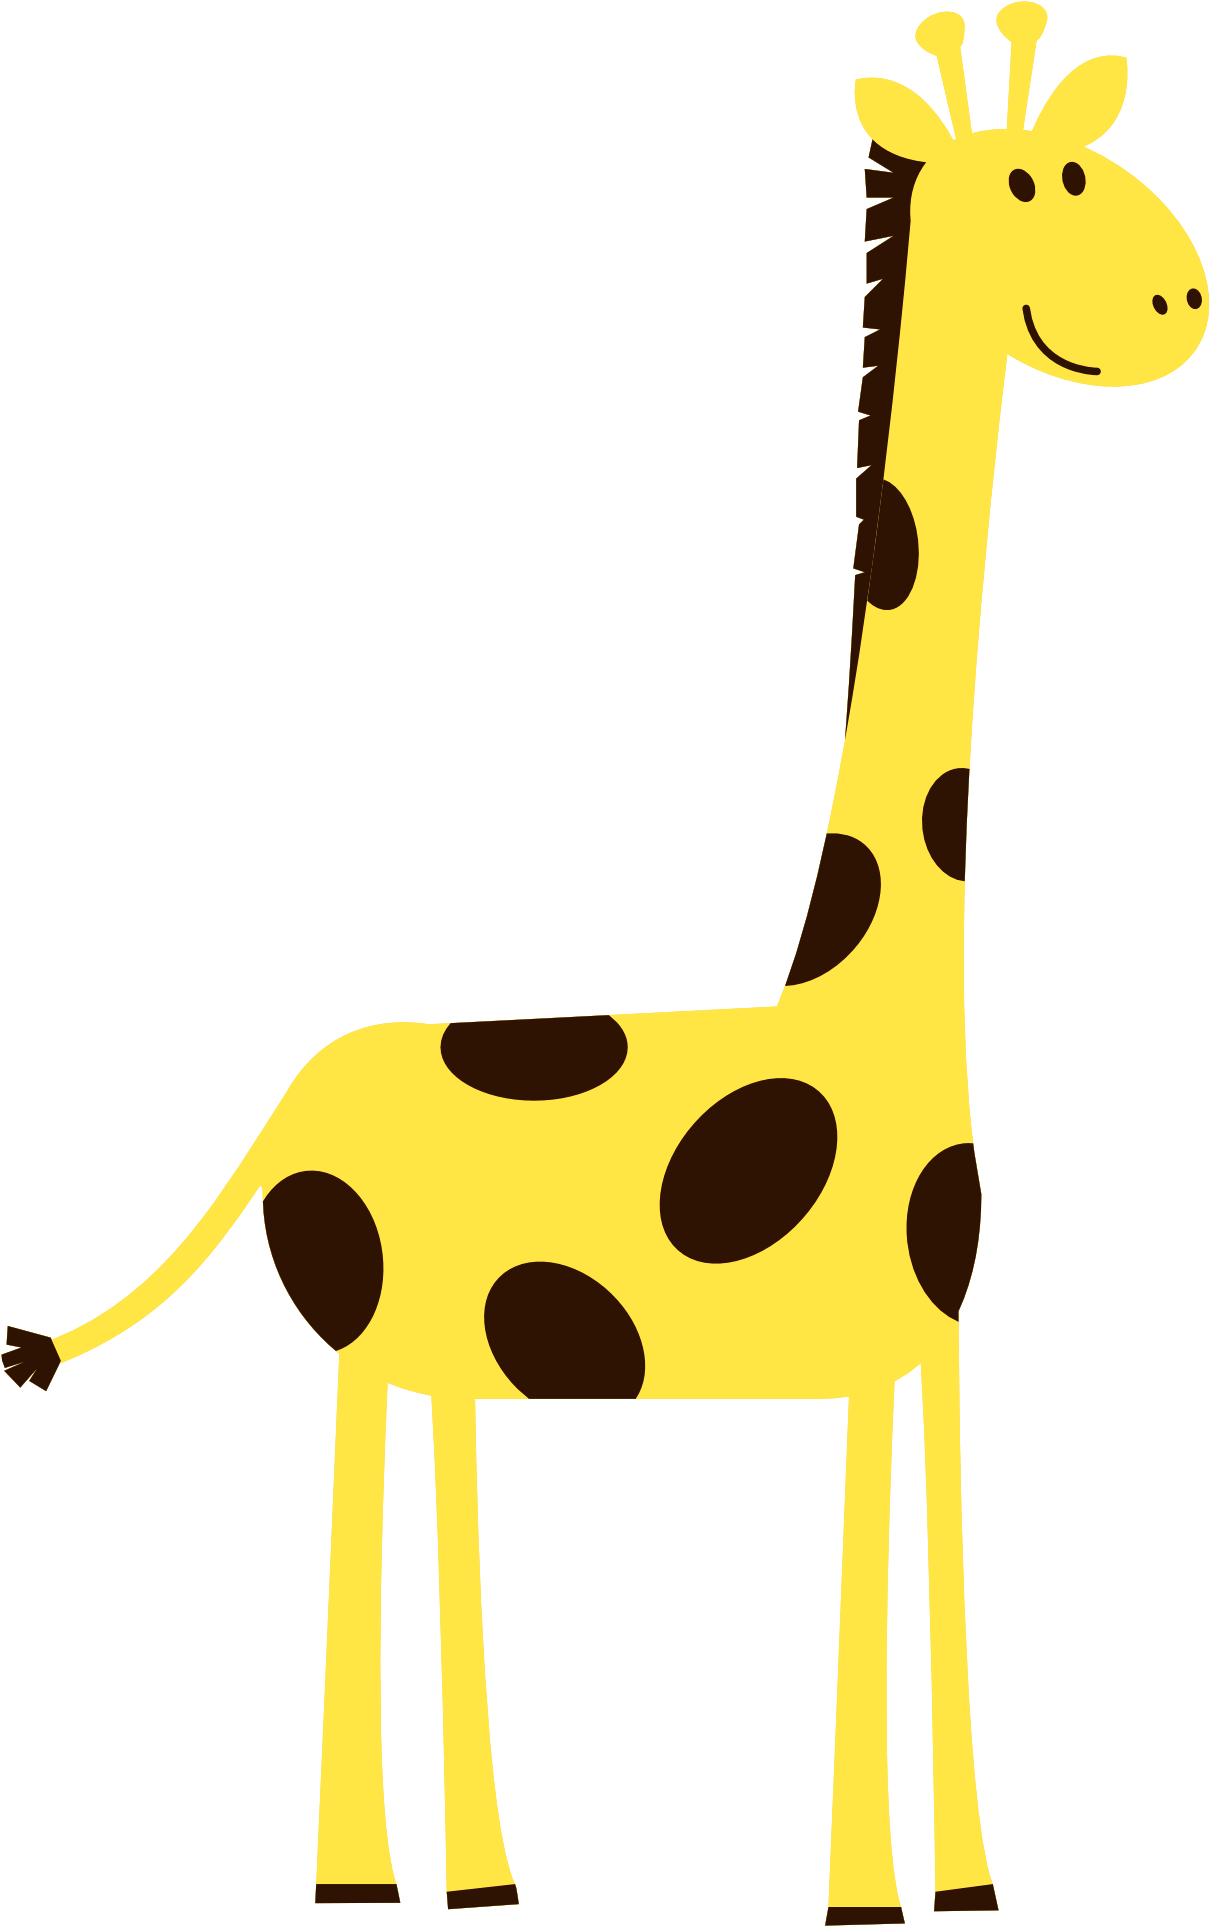 Baby Giraffe Clipart Black And White Clipart Panda - Pin The Tail On The Animal (1979x1979)